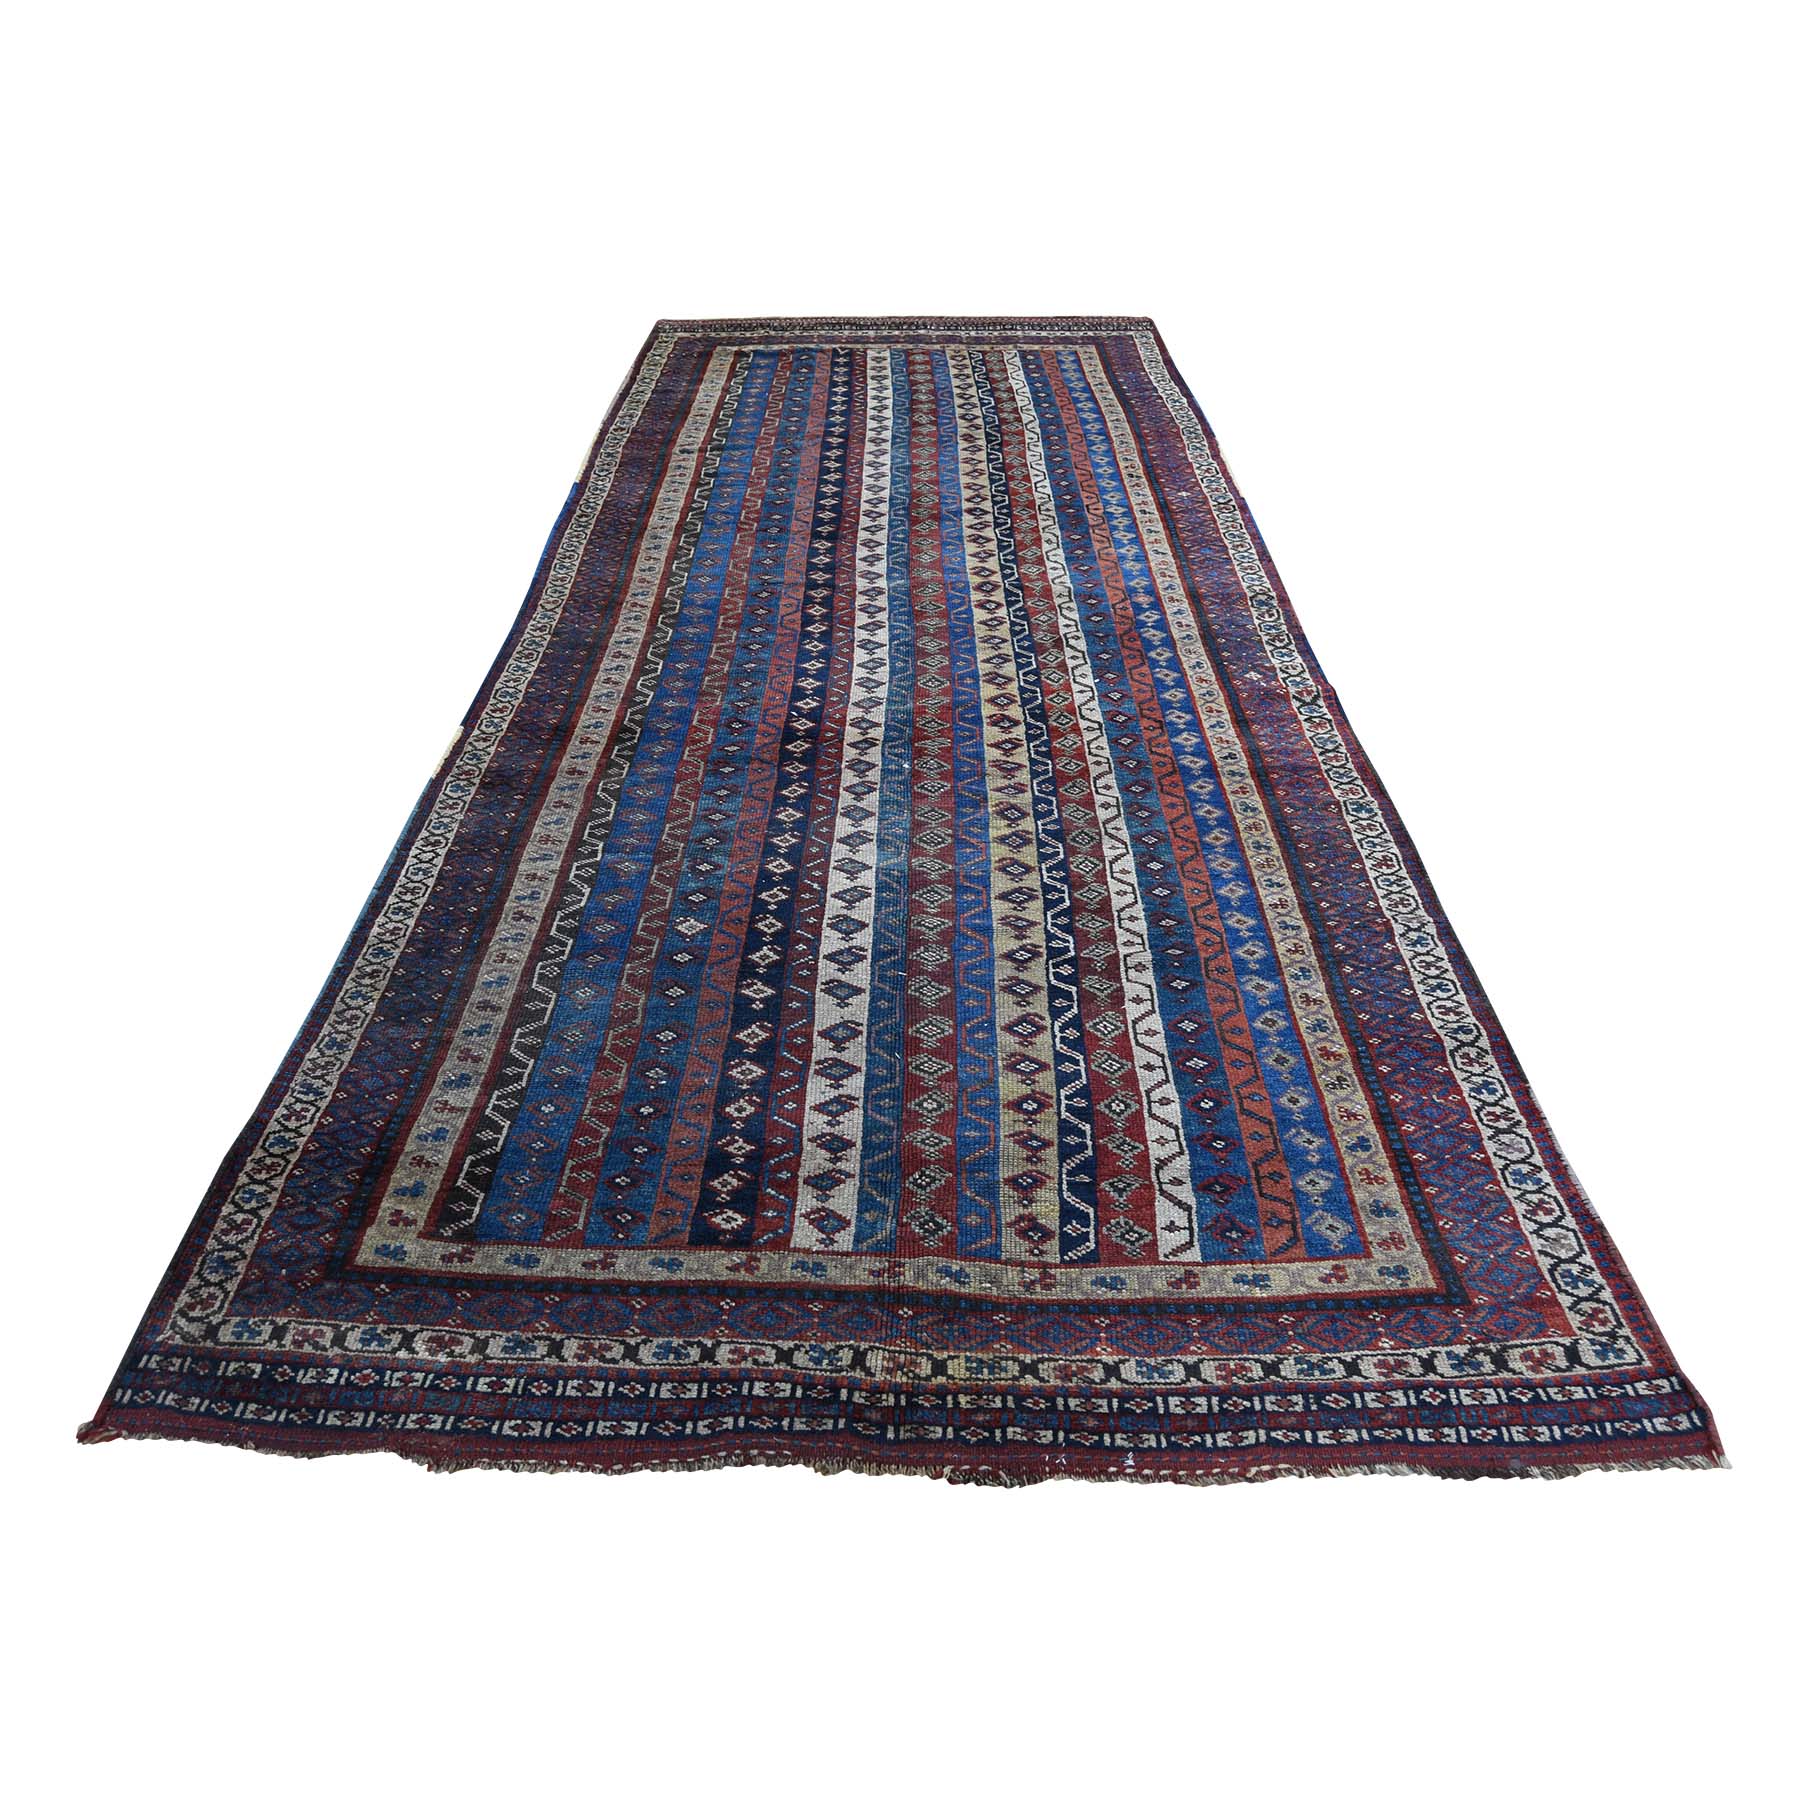 4'10"x11'8" Antique Persian Tribal Lori Buft With Shawl Design Wide Runner Hand Woven Oriental Rug 